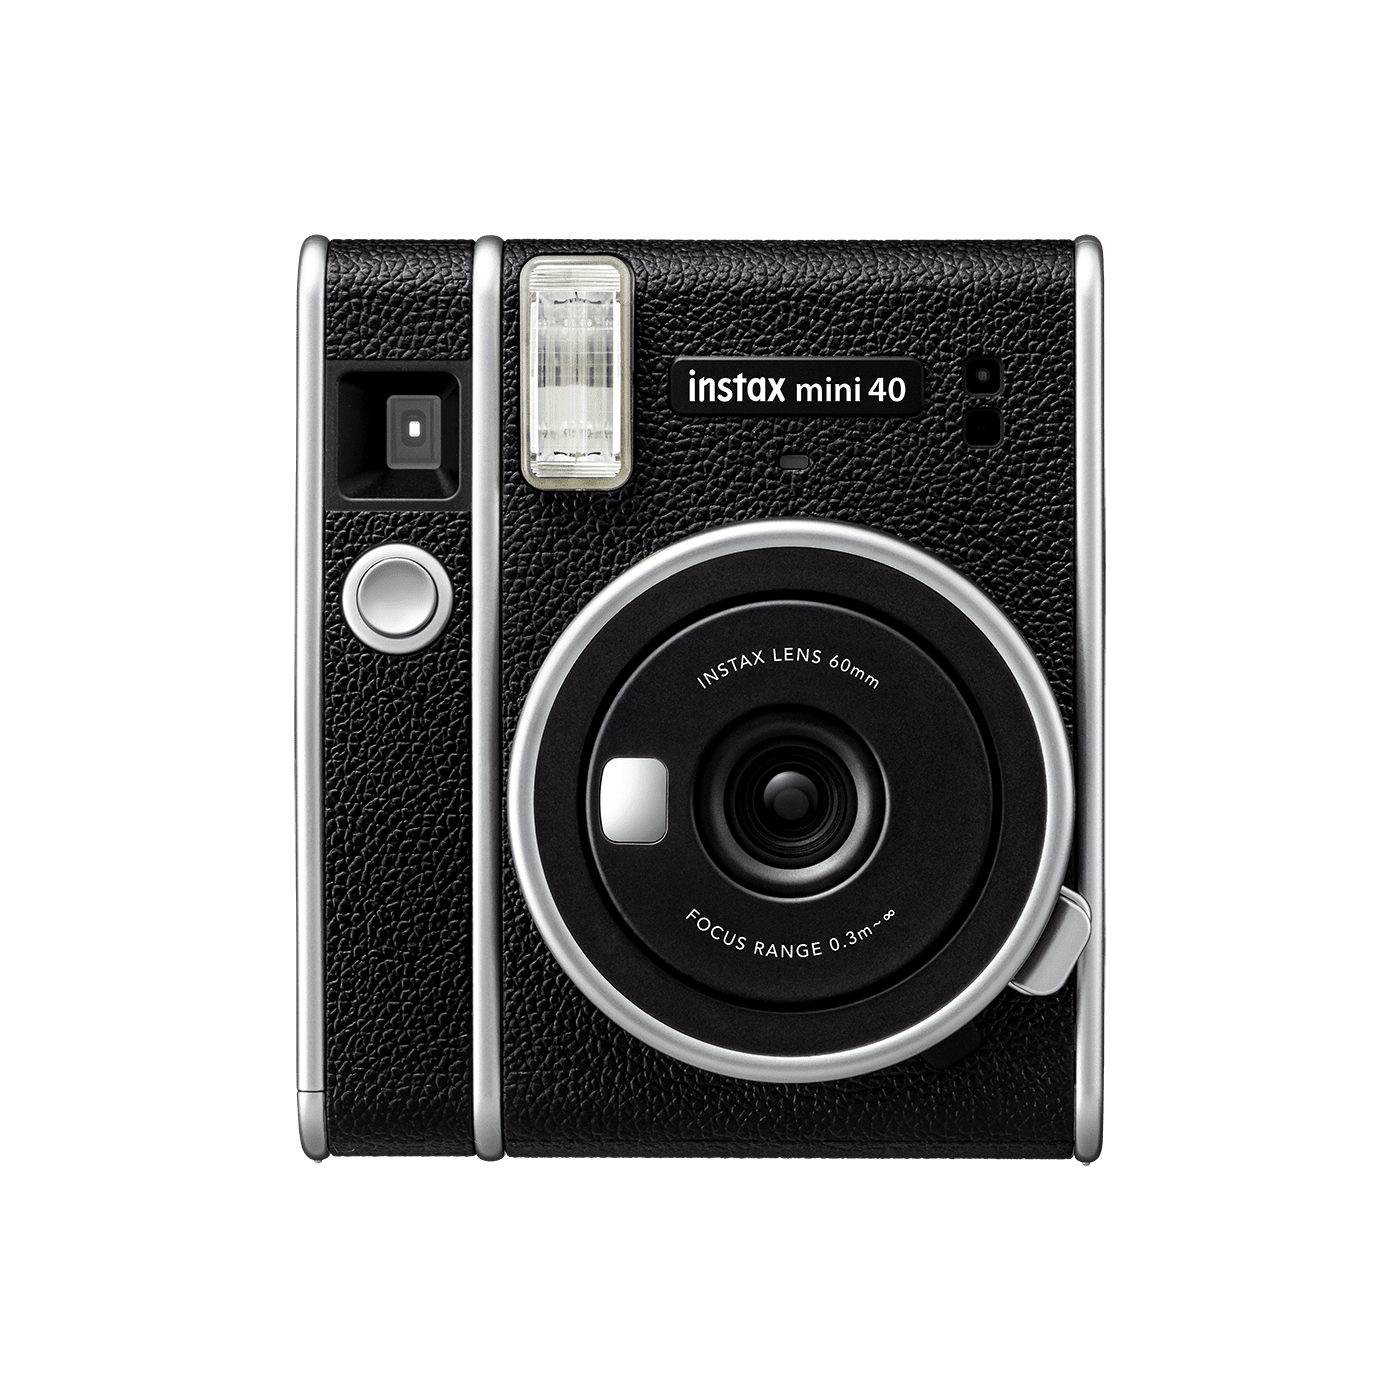 Instax Square SQ40 vs Instax Mini 40: What's the difference?